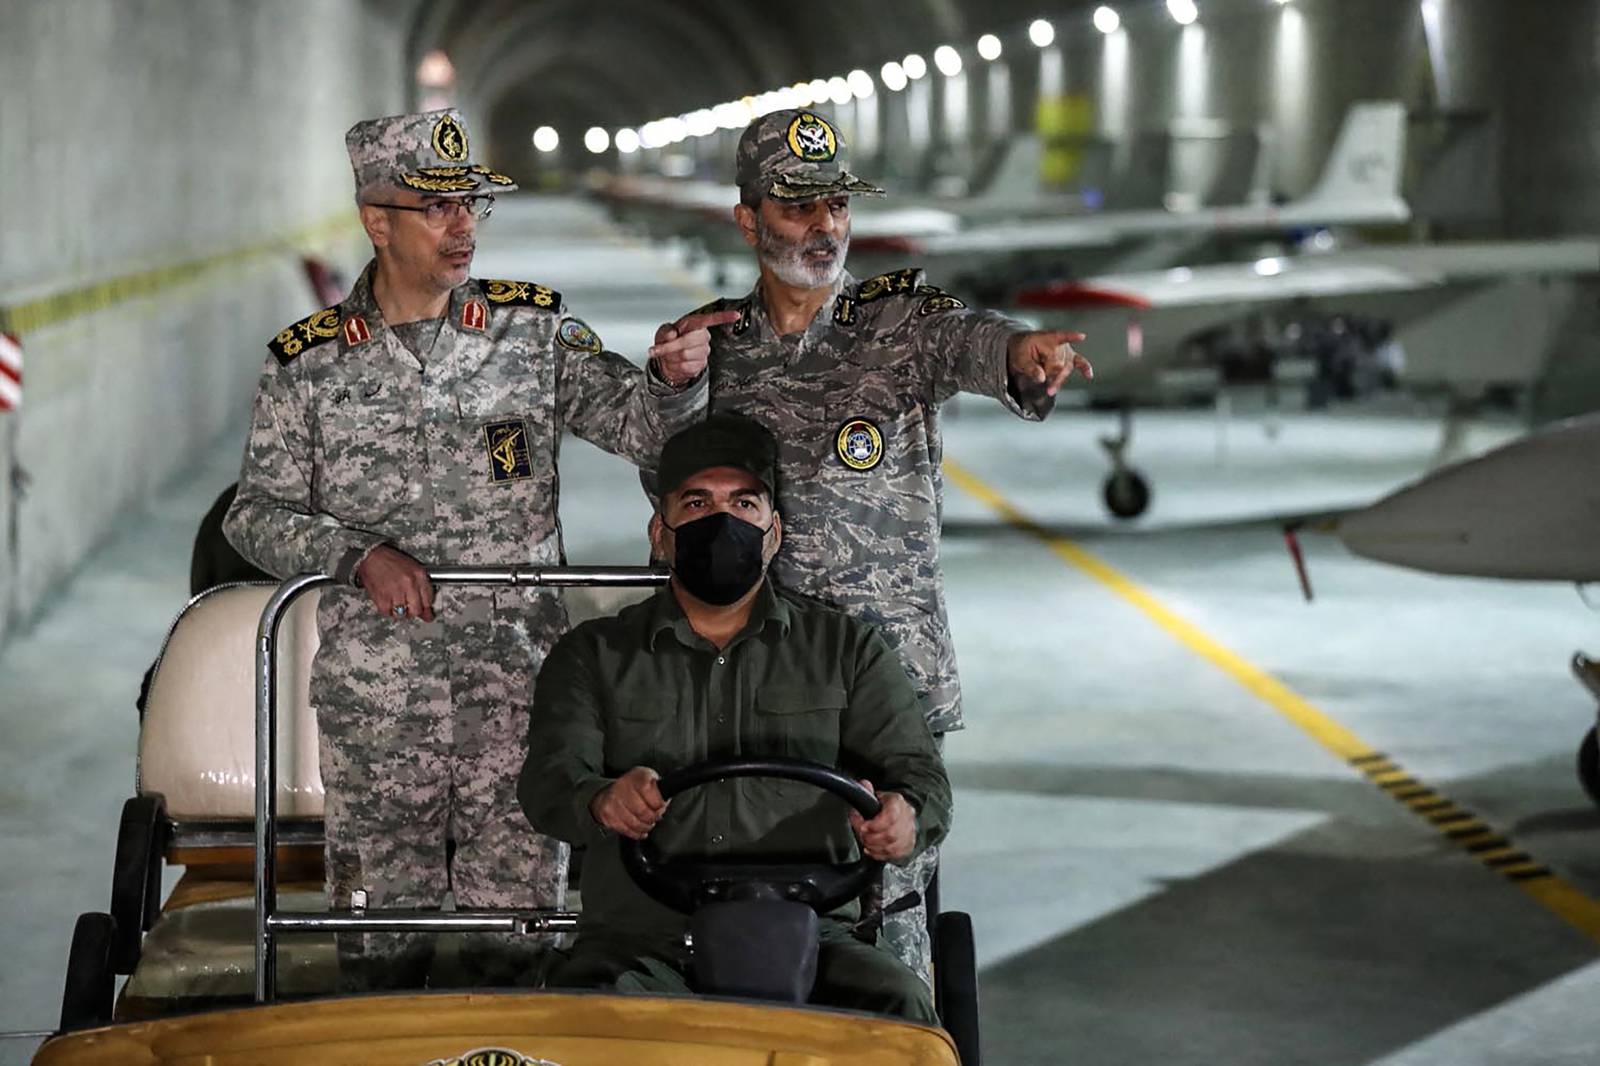 Maj Gen Mohammad Bagheri, left, Iran's Armed Forces Chief of Staff, and Maj Gen Abdolrahim Mousavi, Army Commander-in-Chief, visit an underground drone base at an undisclosed location in Iran. AFP